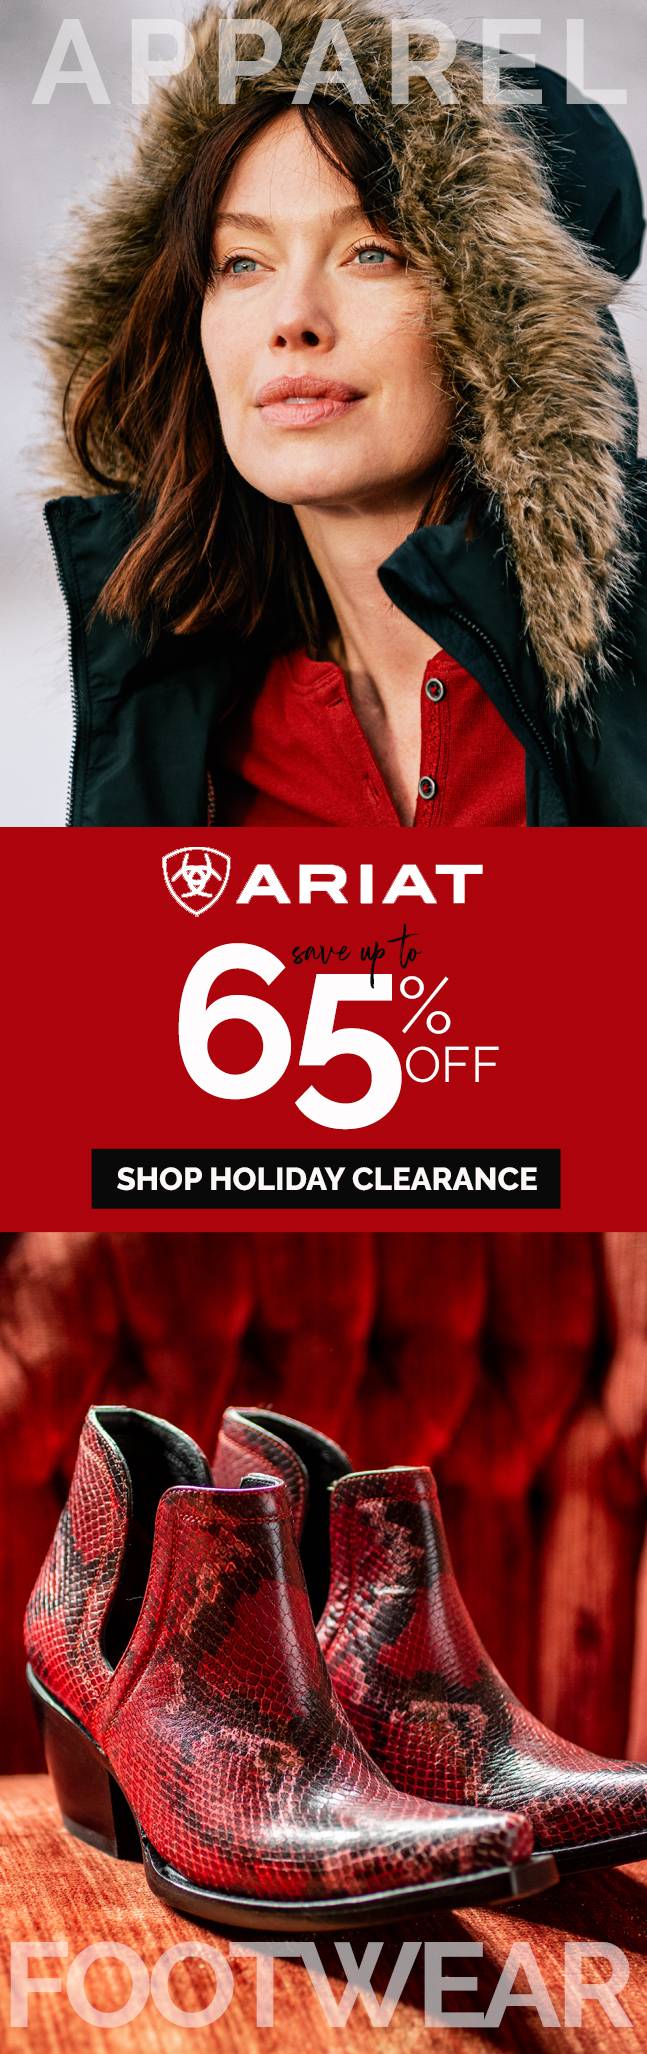 Ariat Holiday Clearance